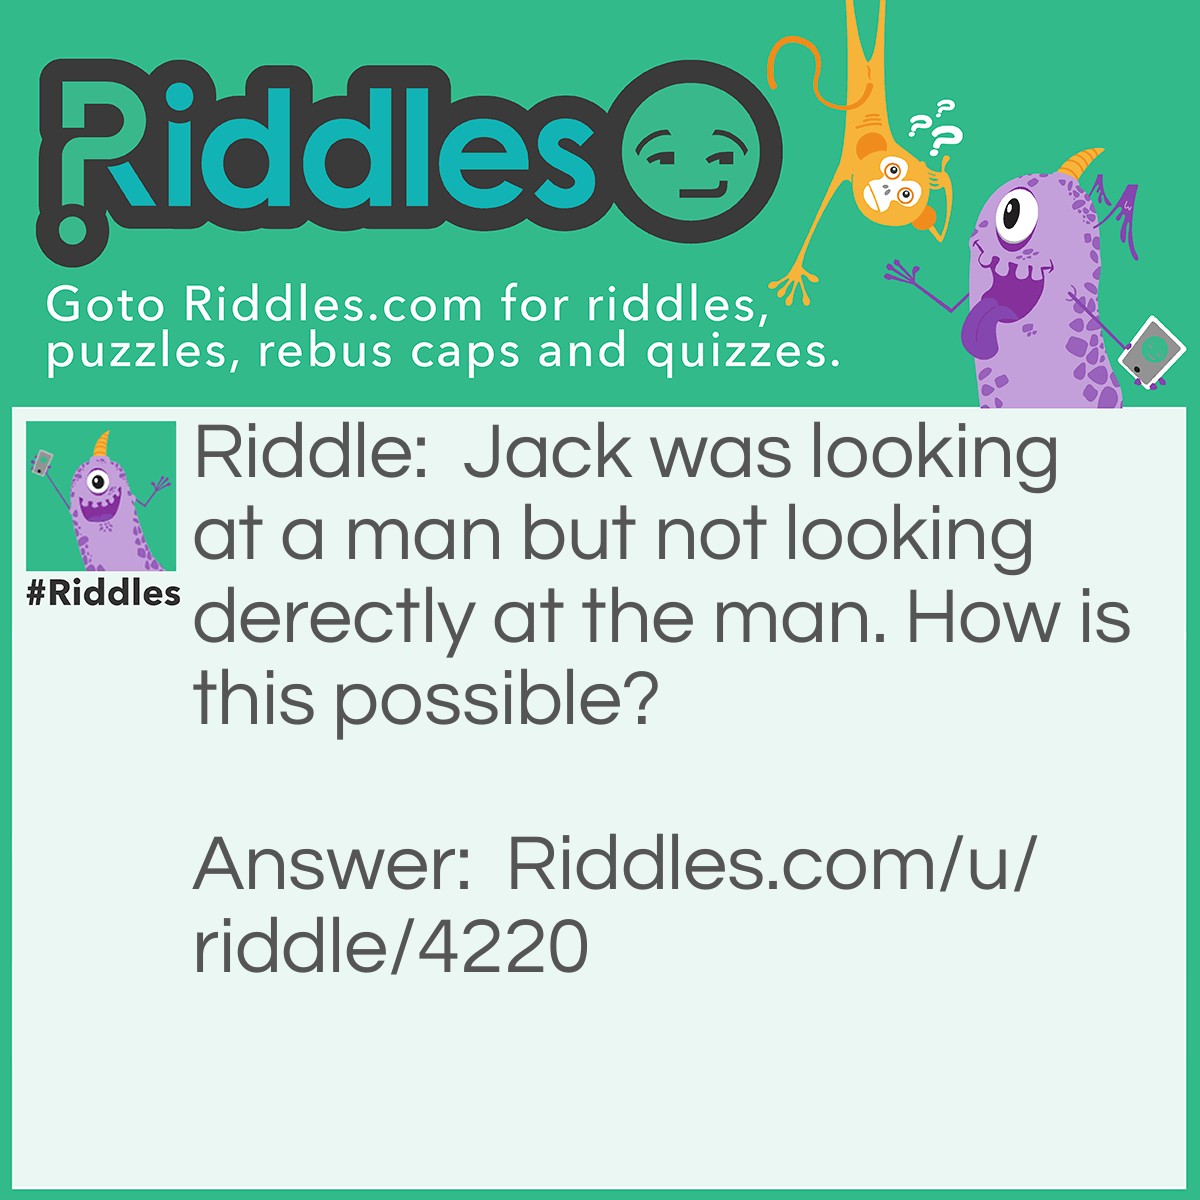 Riddle: Jack was looking at a man but not looking derectly at the man. How is this possible? Answer: Jack was looking in a mirrror and the man was behind Jack.